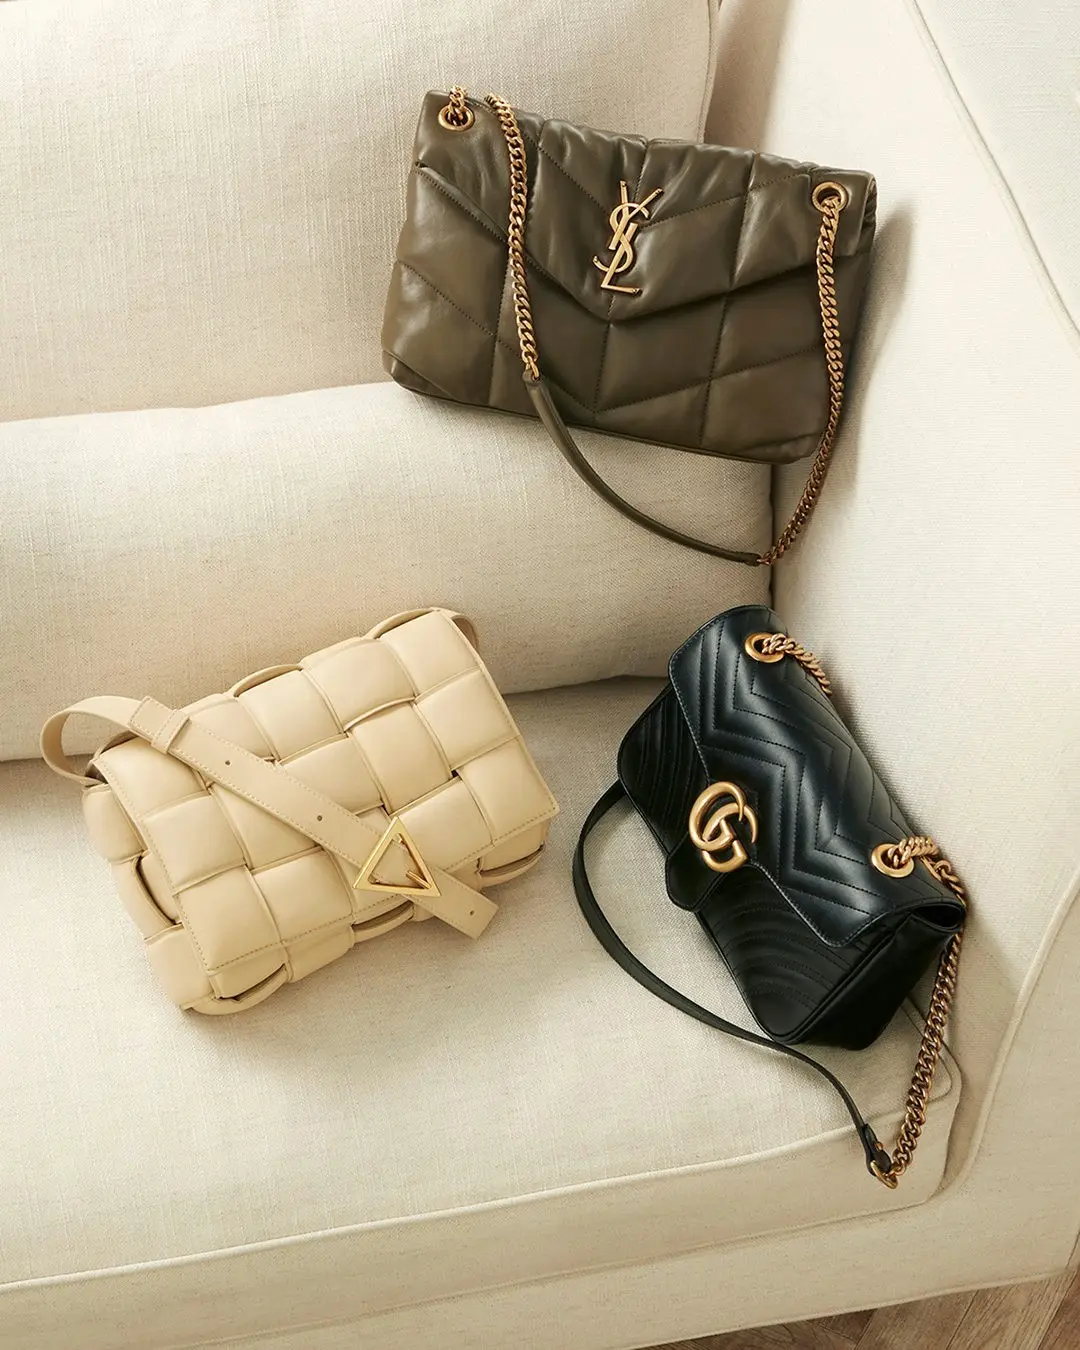 7 Helpful Tips for Picking out the Perfect Handbag ...